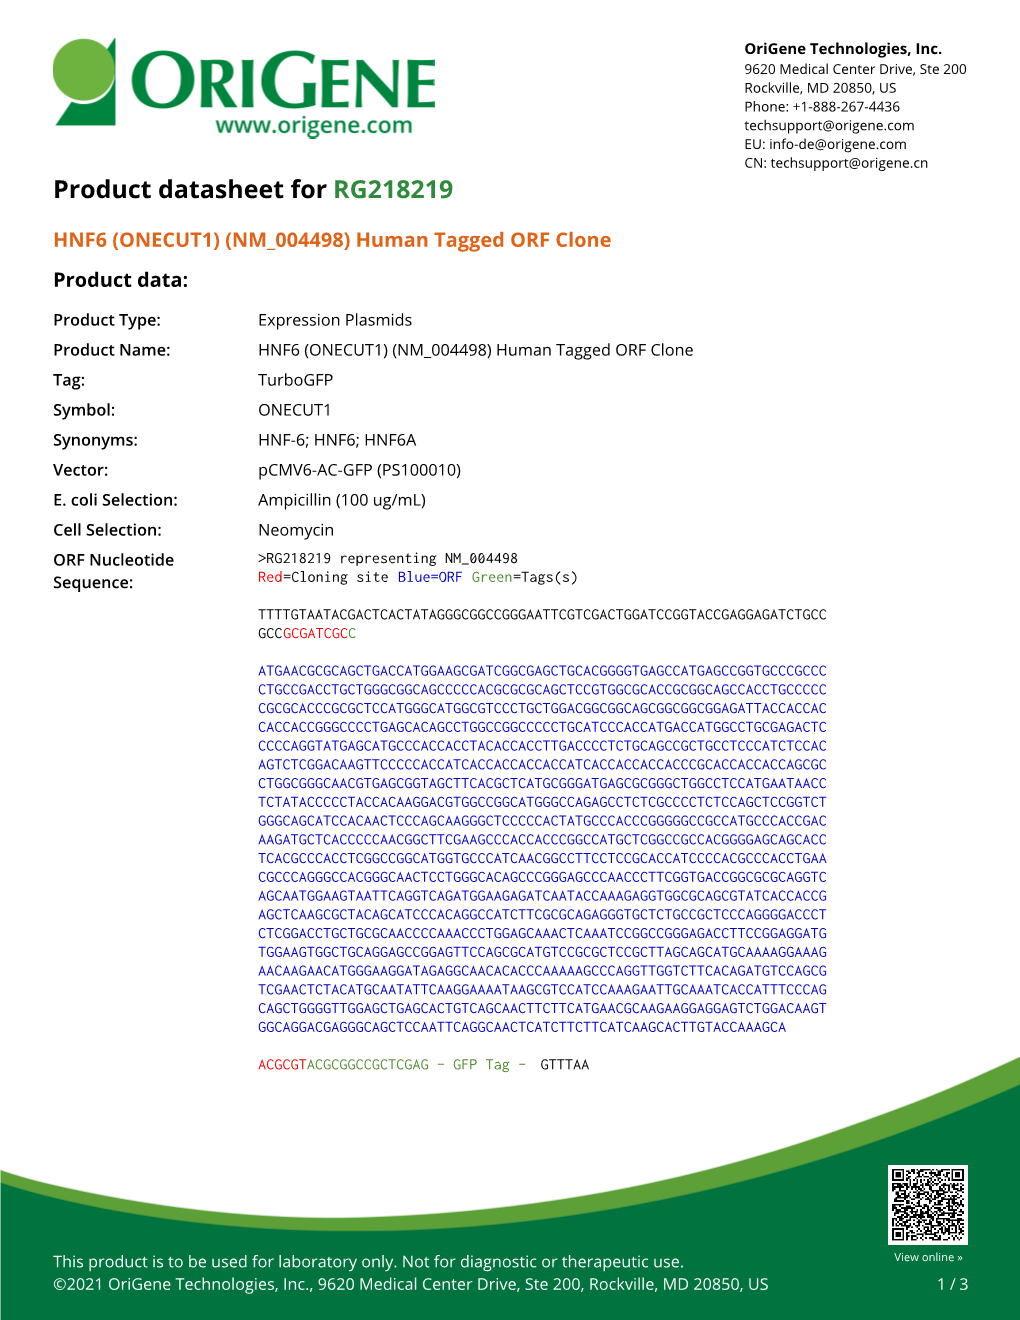 HNF6 (ONECUT1) (NM 004498) Human Tagged ORF Clone Product Data